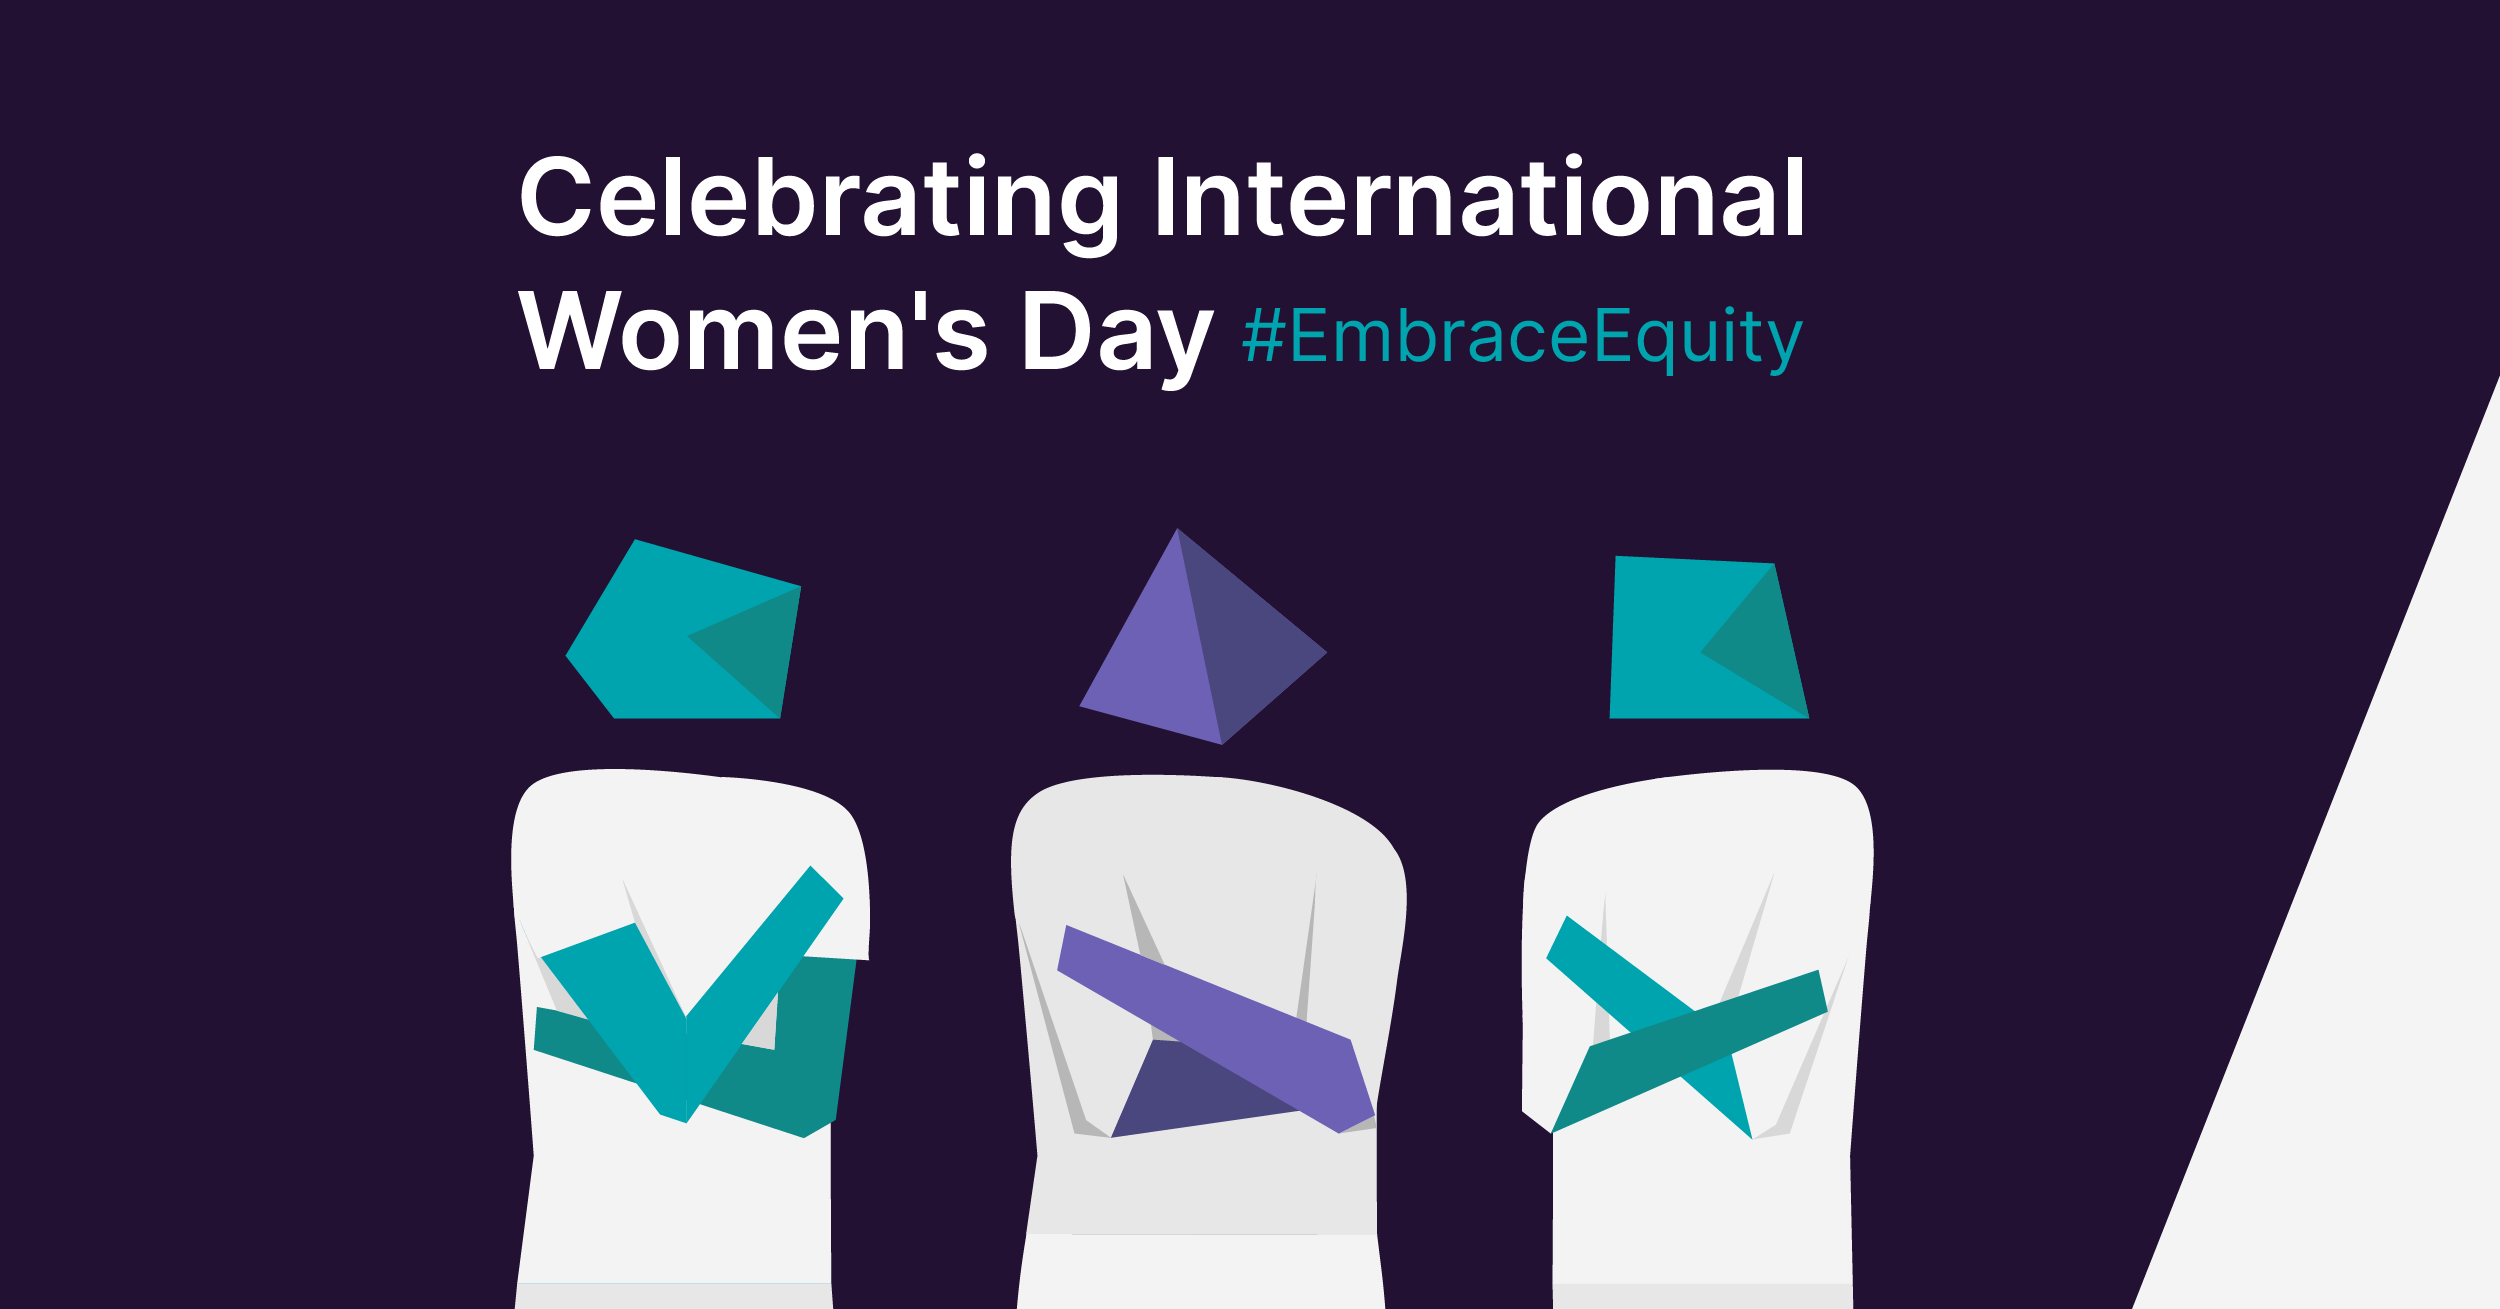 On International Women's Day, we must embrace equity in pay and opportunity to close the gender pay gap.